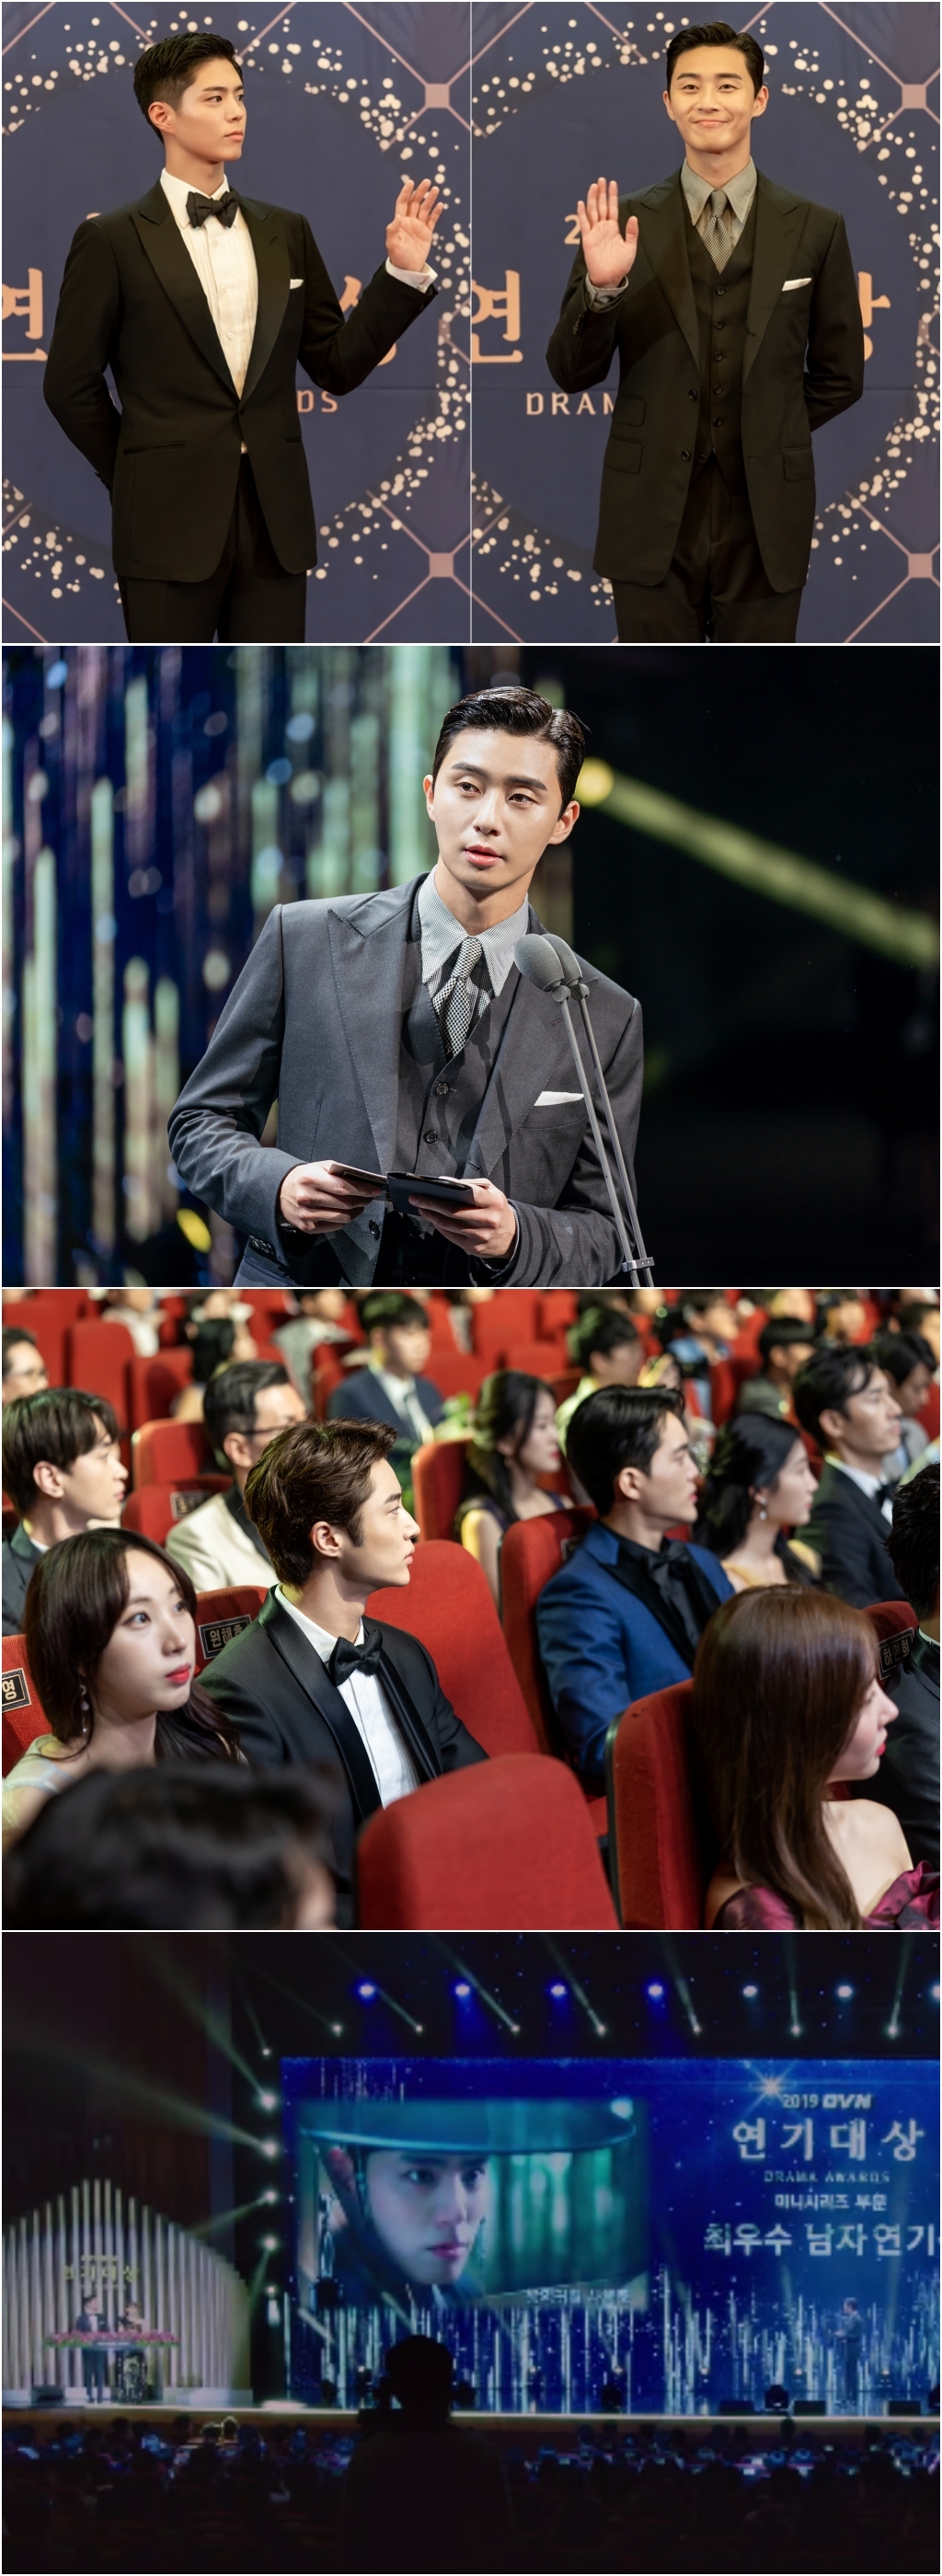 On June 6, TVNs WALL KBS Drama Special Youth Records (playwright Ha Myung-hee/director An Gil-ho) released a photo of the scene of the lavish year-end awards ceremony ahead of the second film.  In the spotlight, the red carpet stars Park Bo-gum, as well as park seo-joon, who appears as his predecessor and top star Song Min-so.Sahye-jun, struggling to achieve his dream, opened the Shusu flower path.  Despite the ploy of his former company, Lee Tae-soo (Lee Chang-hoon), Hye-jun Sa hye-jun was a rising star by appearing in the medical KBS Drama Special Gateway with top star Lee Hyun-so.  The romance between Sahye-jun and Seung-ha (Park So-dam) who pledged constant love in the midst of a busy life added excitement.  There were still crises on days when everything seemed to be fine.  Two young men who were moving toward tomorrow without being frustrated by the reality.  There are growing questions about whether we can protect our dreams and love in the face of different realities and many variables.Meanwhile, the dazzling visuals of Sahye-jun, who attended the acting awards ceremony, catch the eye in the photos released.  The unique aura of Sahye-juns model predecessor and top star, Park Seo-joon, also excites.  It is also interesting to see the tense expressions of Won Hae-hyo (Woo Woo-suk) and Park Do-ha (Kim Kun-woo) waiting for the best male actor award to be announced.  The result is a question of who will be the best male actor, and whether Song Min-so, who has a special relationship with Sahye-jun, can win the trophy to Sahye-jun.In the ninth episode, Sahye-jun is portrayed as an actress.  Earlier, Sahye-jun announced that he wanted to play The Return of the King, a historical drama with a work instead of the kbs drama special, a romance that was guaranteed to be popular in the next installment.  His move as a rising star adds to his expectations.  The Youth records crew is at the beginning of The Hye-Juns era.  Park Seo-joon in particular makes a special appearance and the second act is hotter.  We look forward to his performance, which will add to the power of disassembly with top star Song Min-so, who has a special relationship with Sahye-jun.5, 9 p.m.